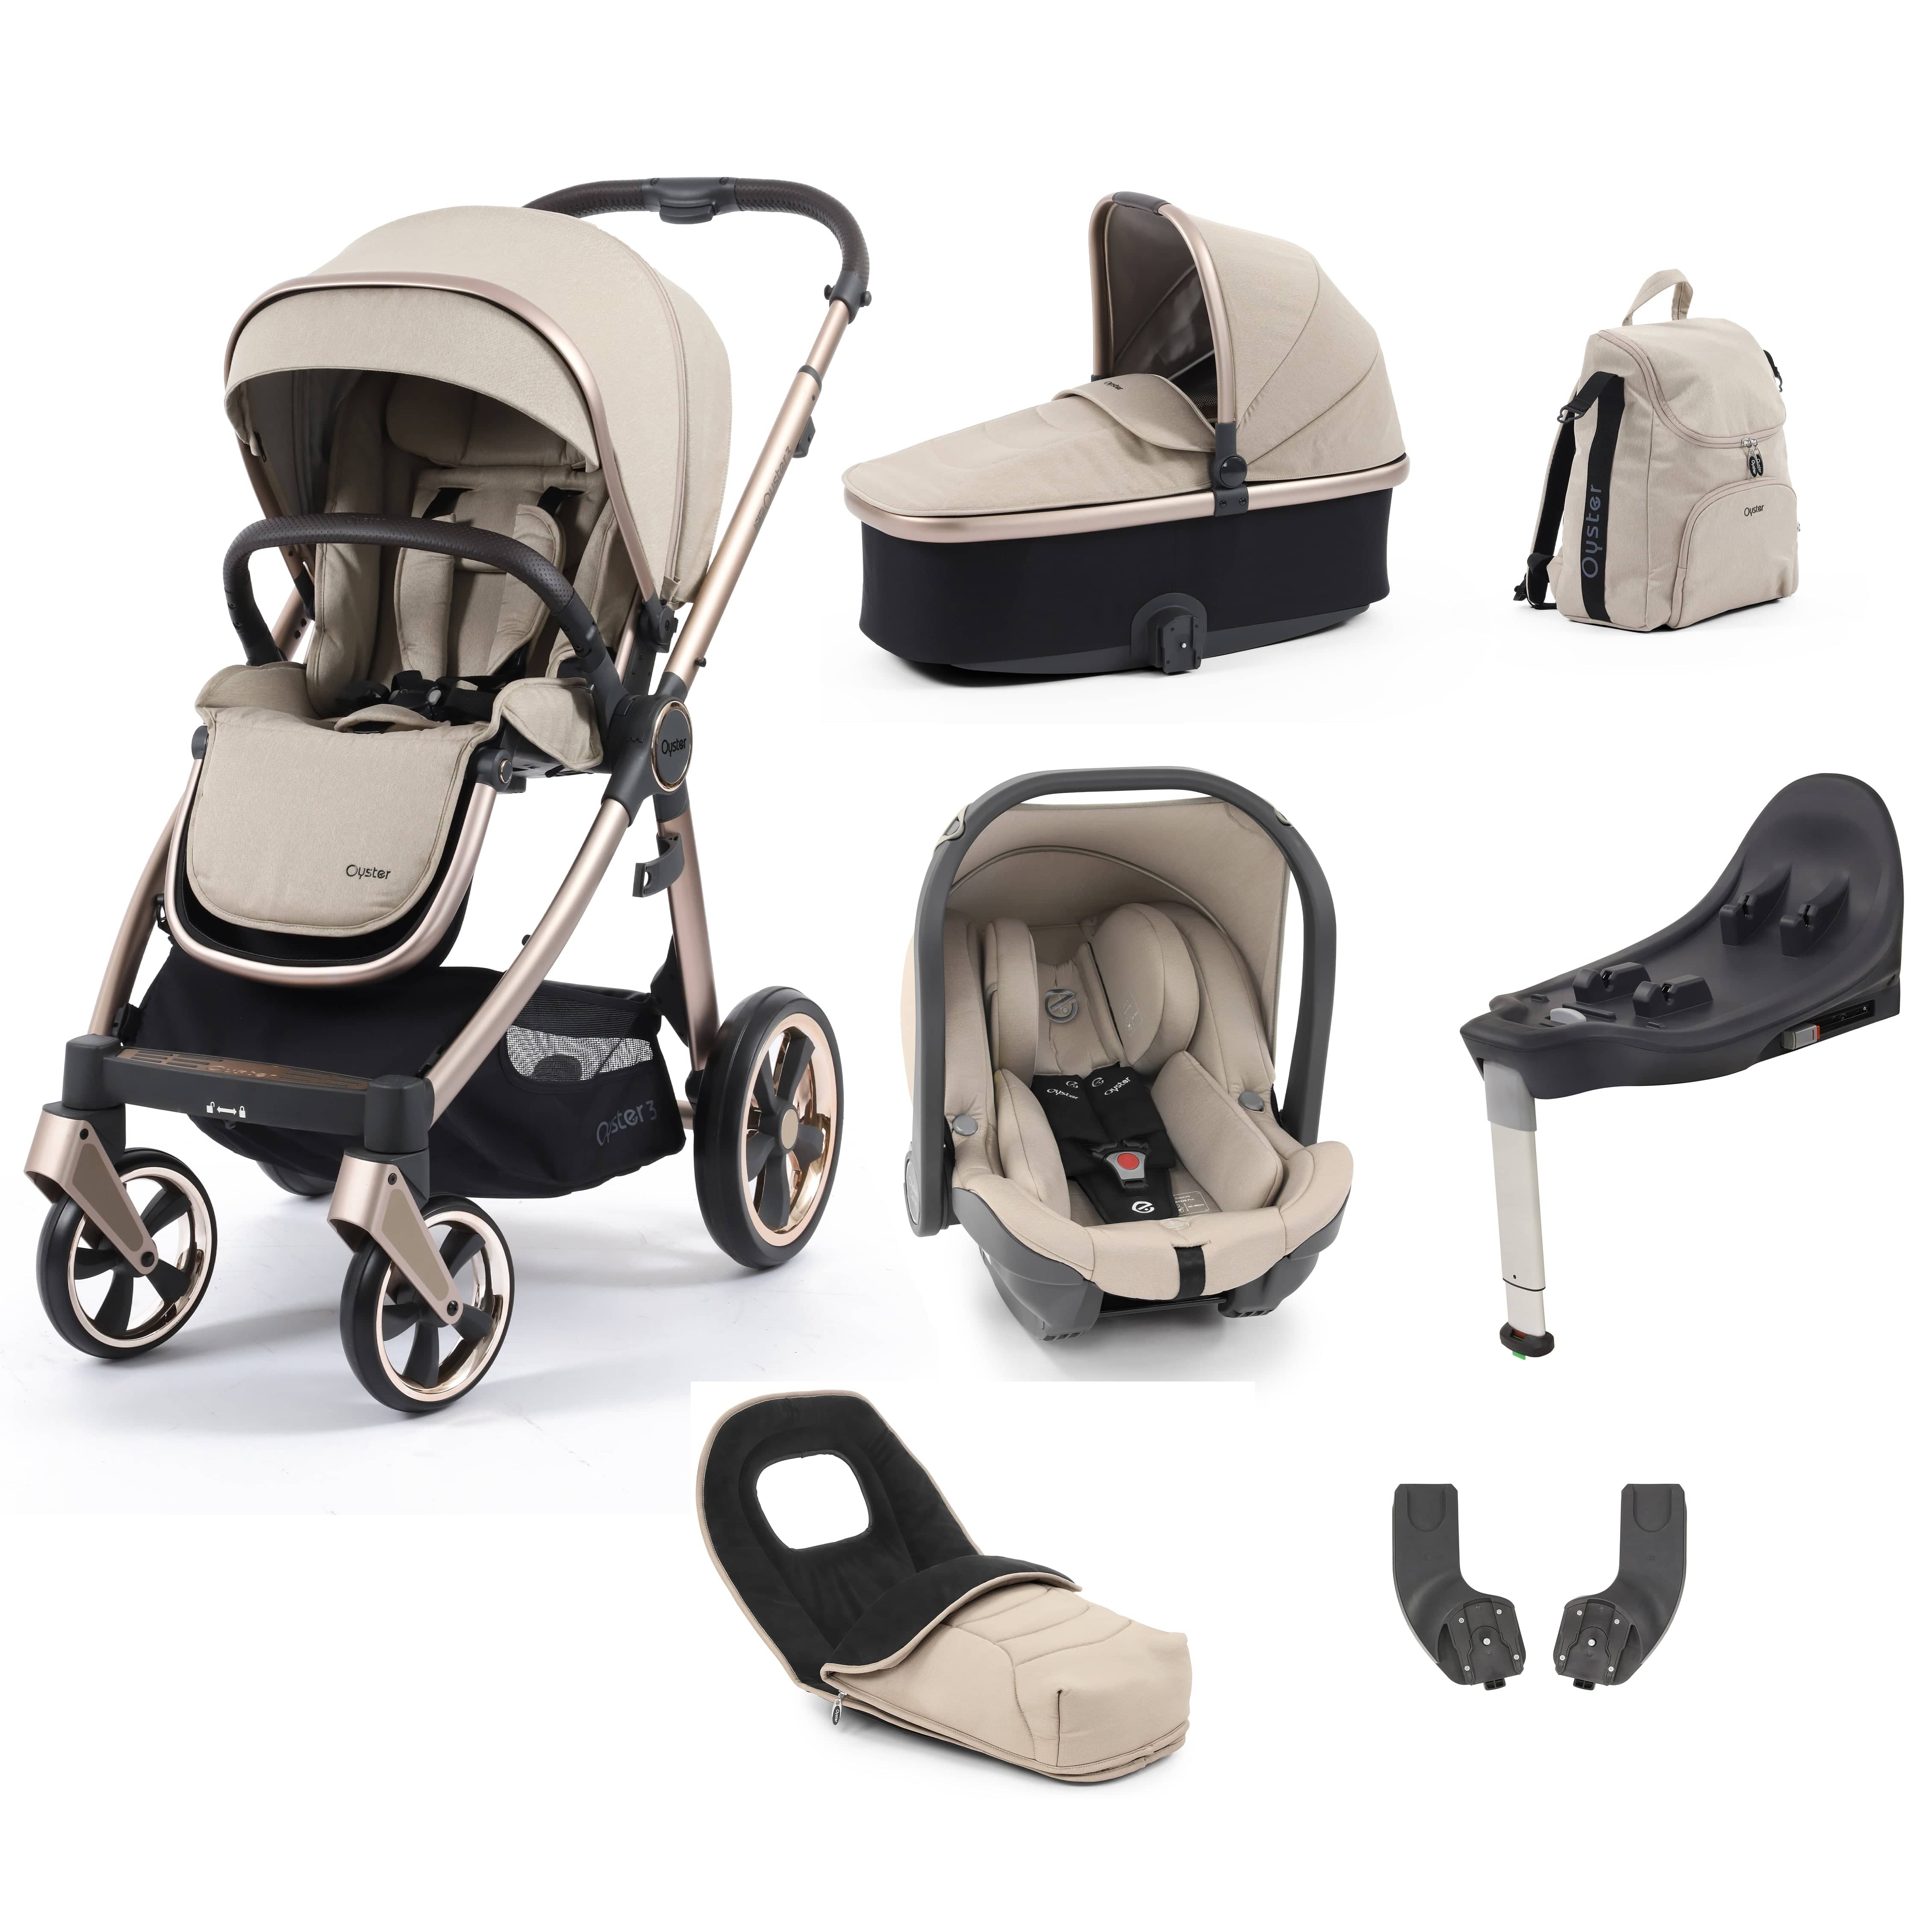 Babystyle Oyster 3 Luxury 7 Piece with Car Seat Bundle in Creme Brulee Travel Systems